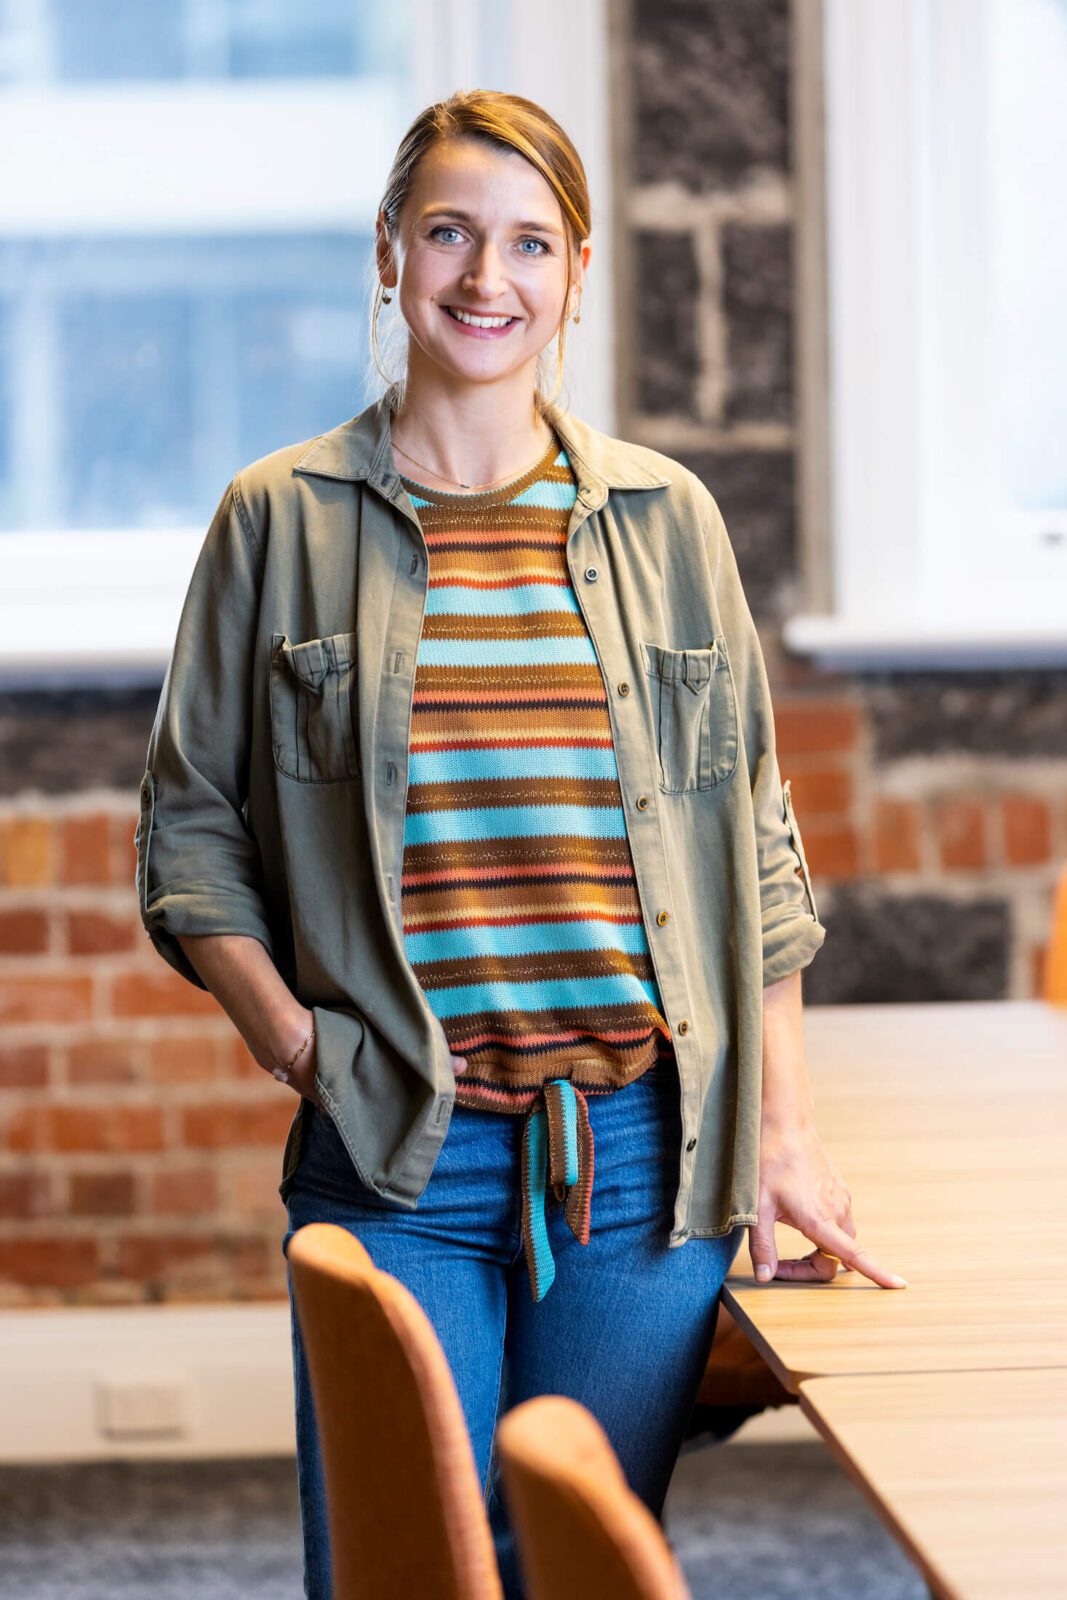 Woman in striped colourful top, army green shirt, blue jeans smiles broadly to camera leaning on boardroom table